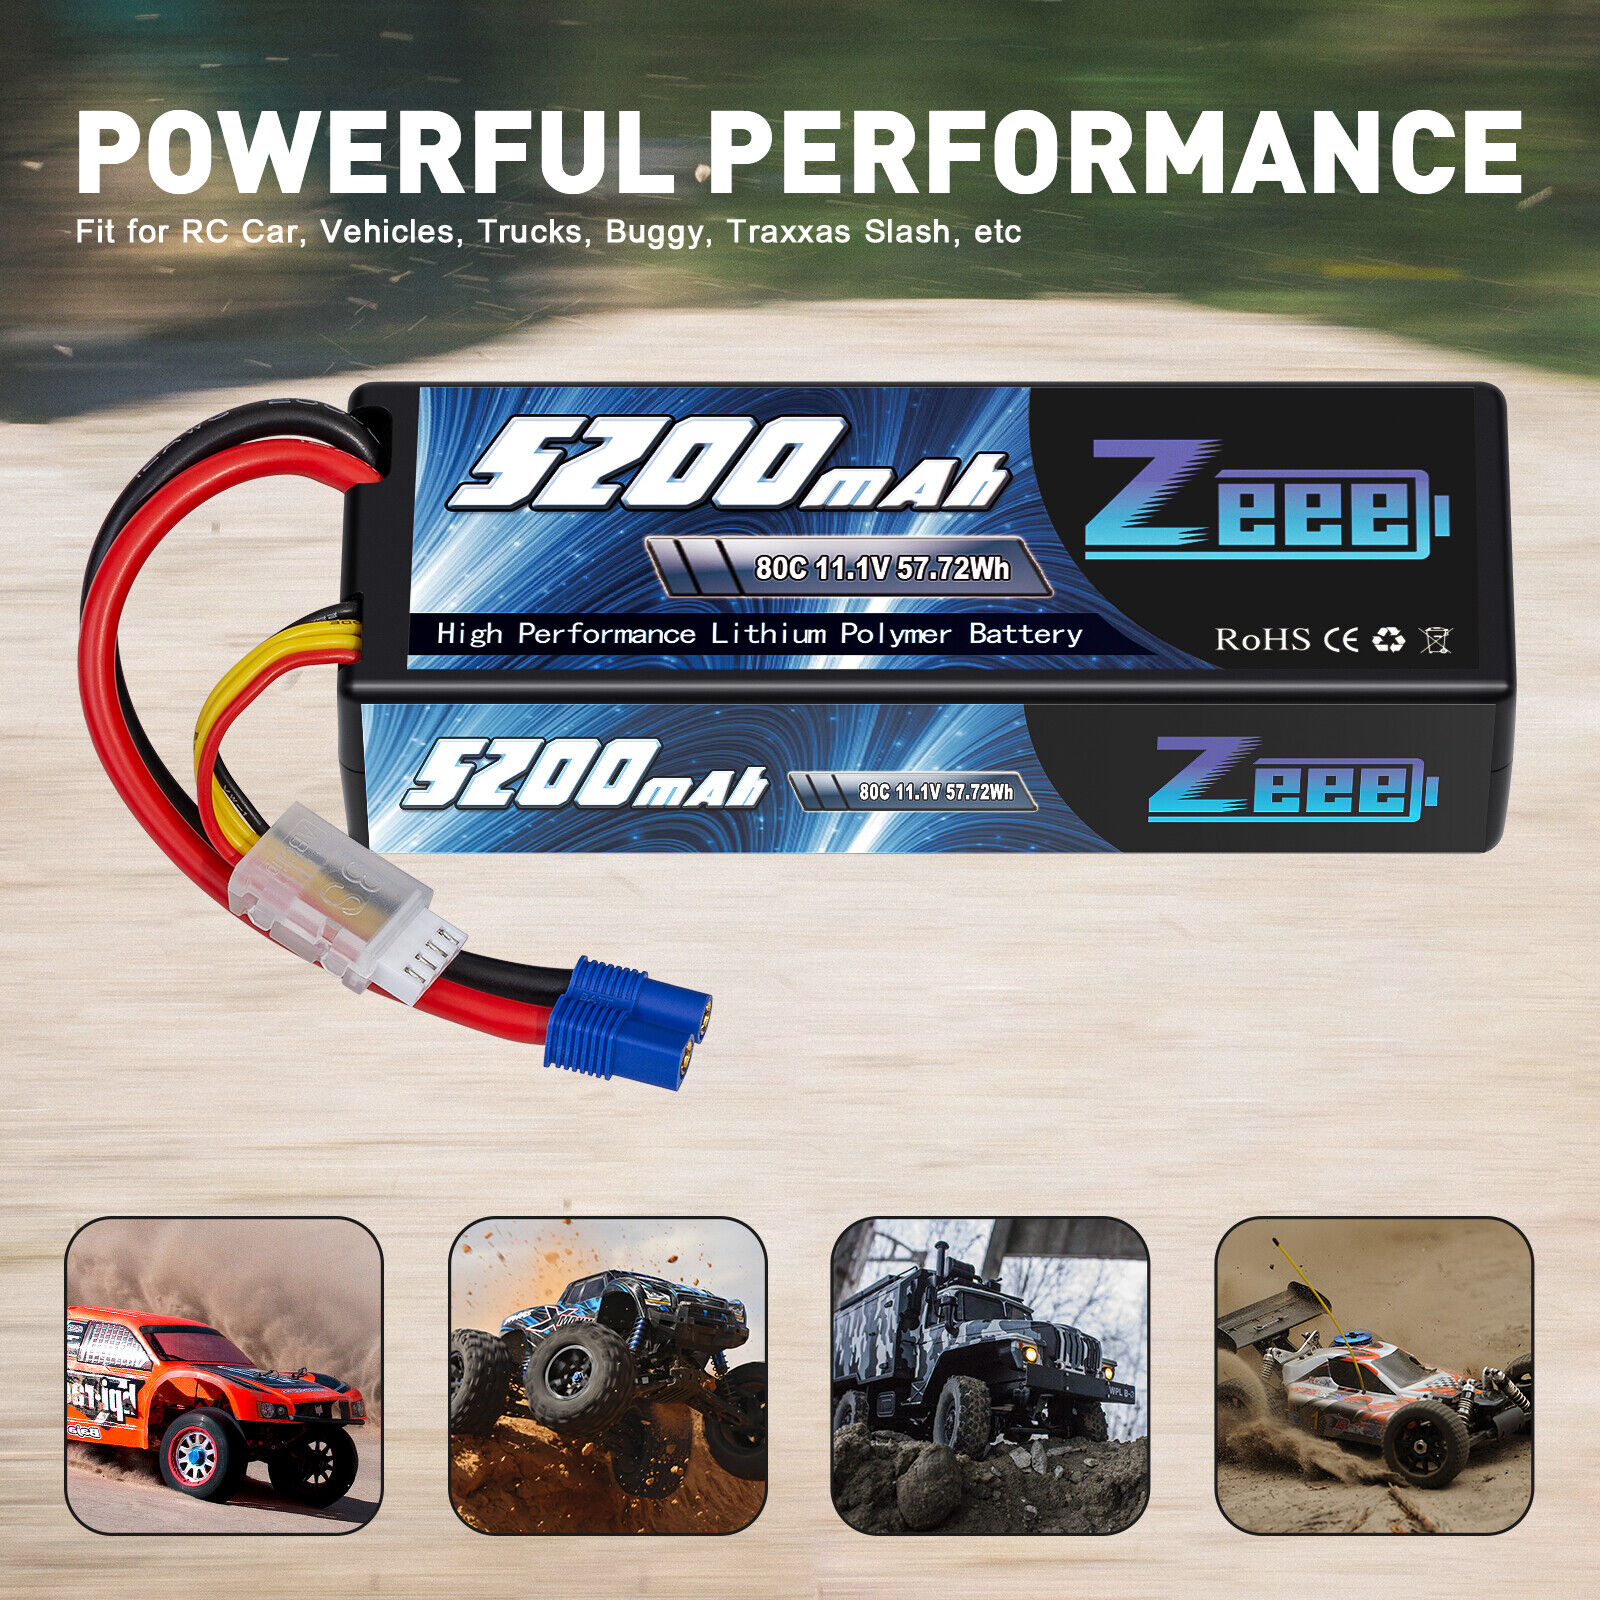 2x Zeee 11.1V 80C 5200mAh EC3 3S LiPo Battery for RC Car Truck Helicopter Buggy ZEEE Does Not Apply - фотография #6